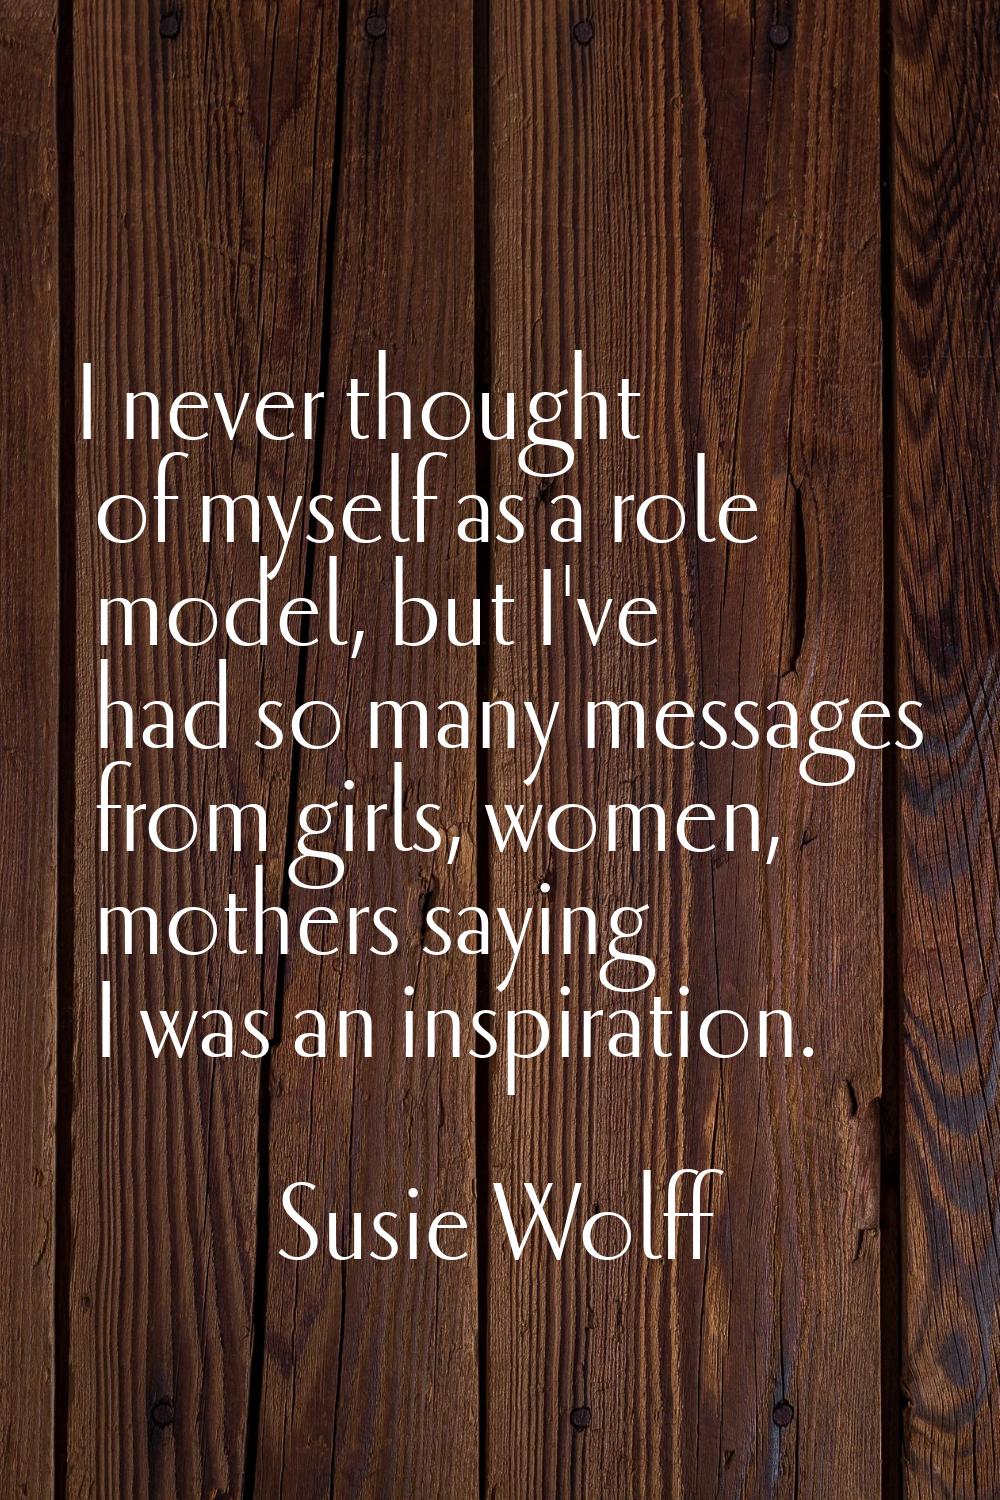 I never thought of myself as a role model, but I've had so many messages from girls, women, mothers